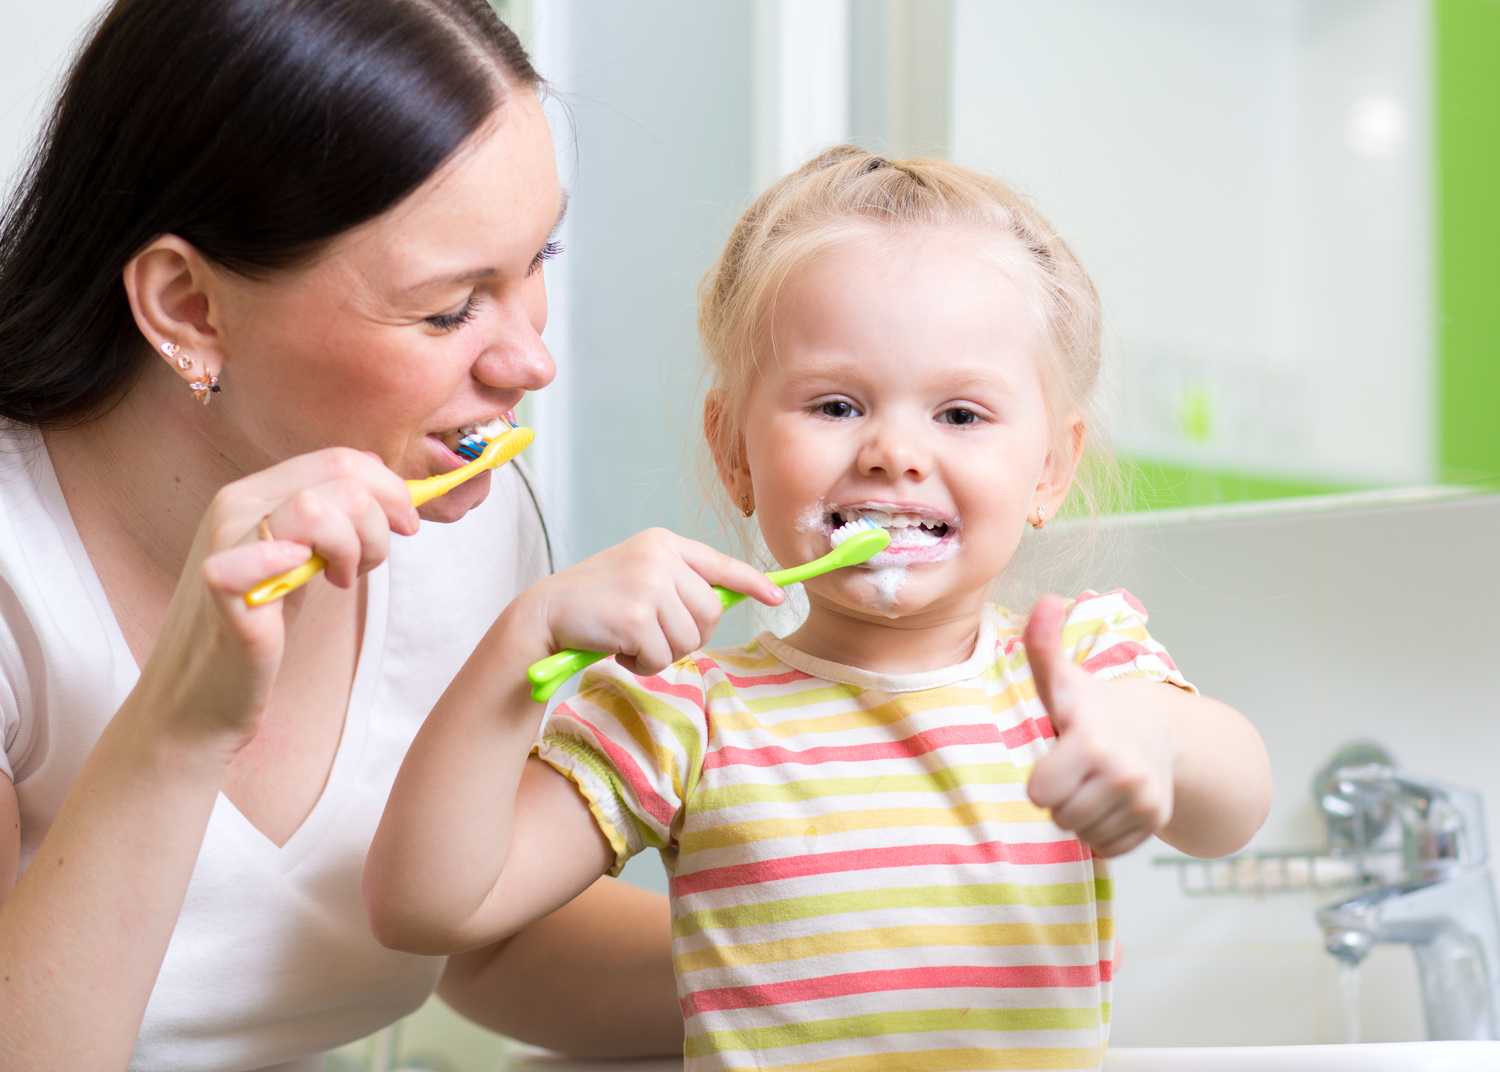 How To Keep Your Child’s Teeth Healthy